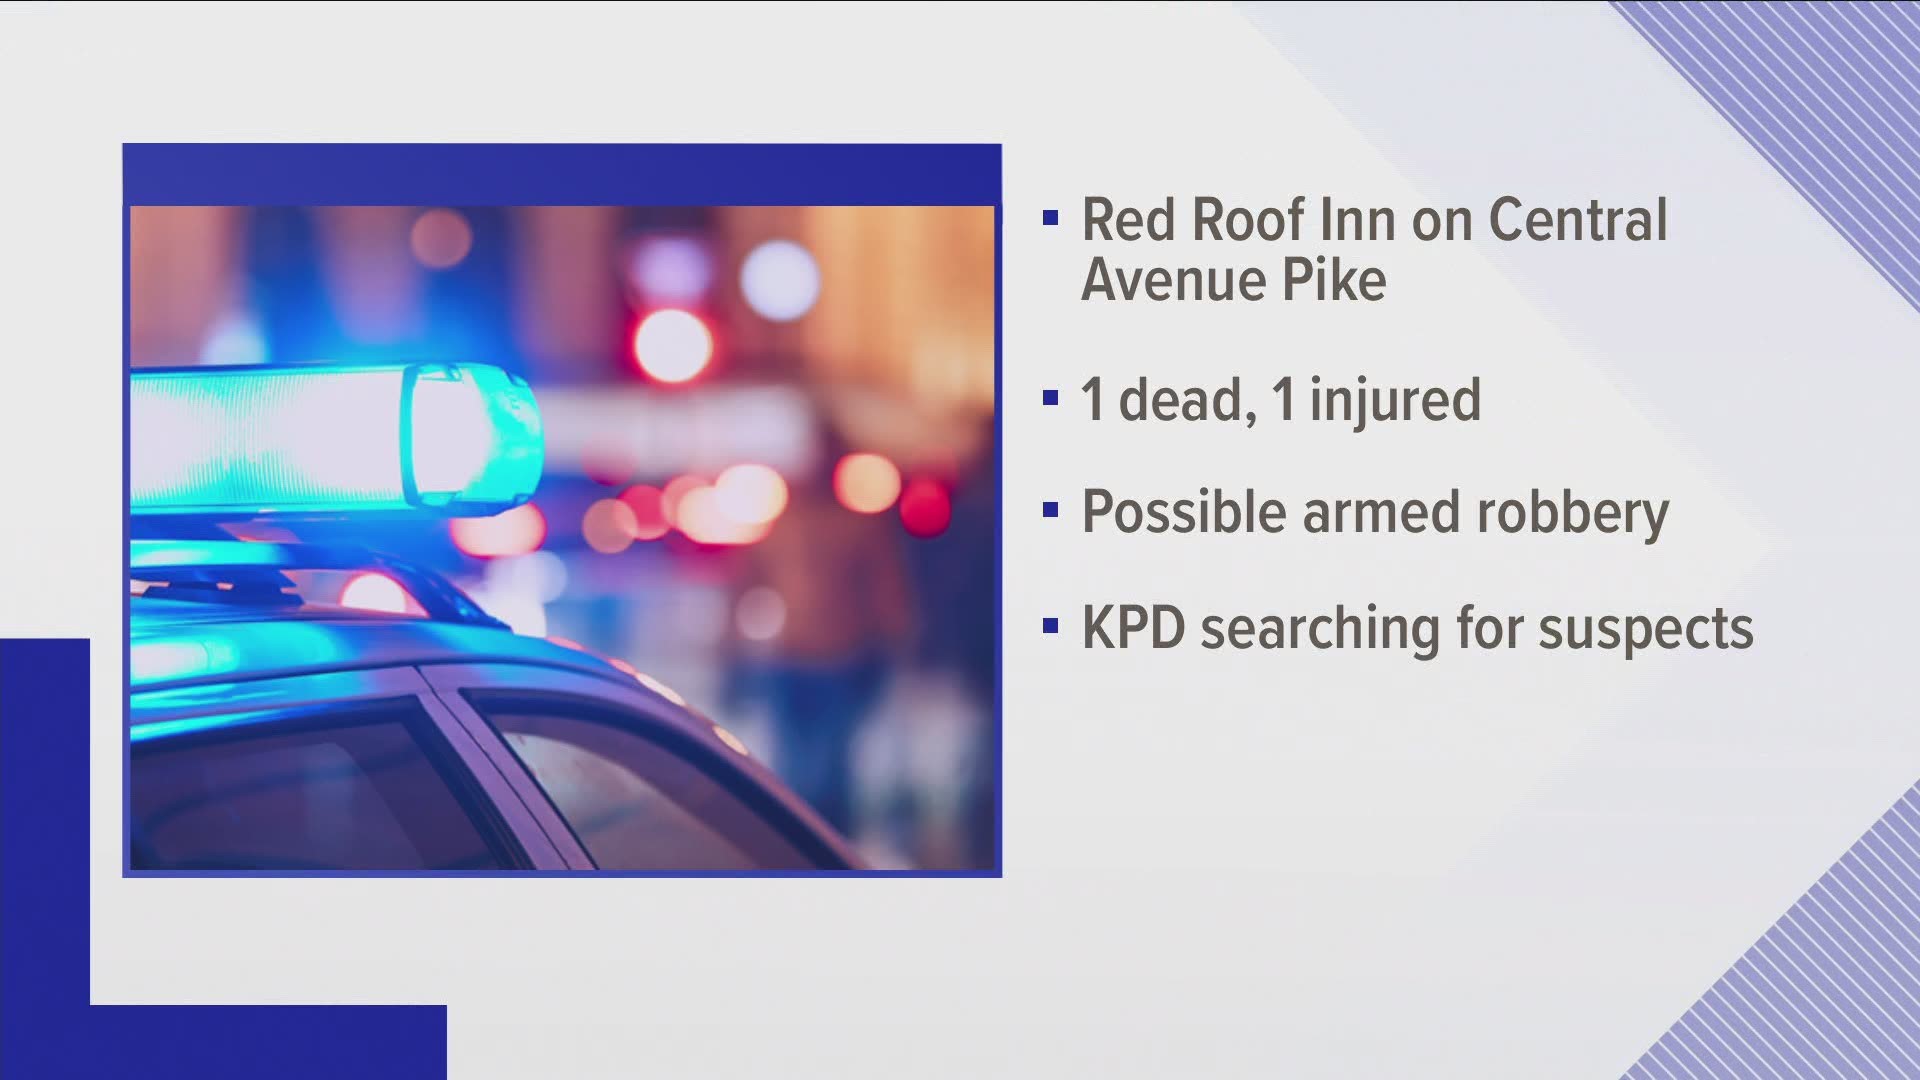 the knoxville police say they responded to the red roof inn on central avenue pike at around 9:30..